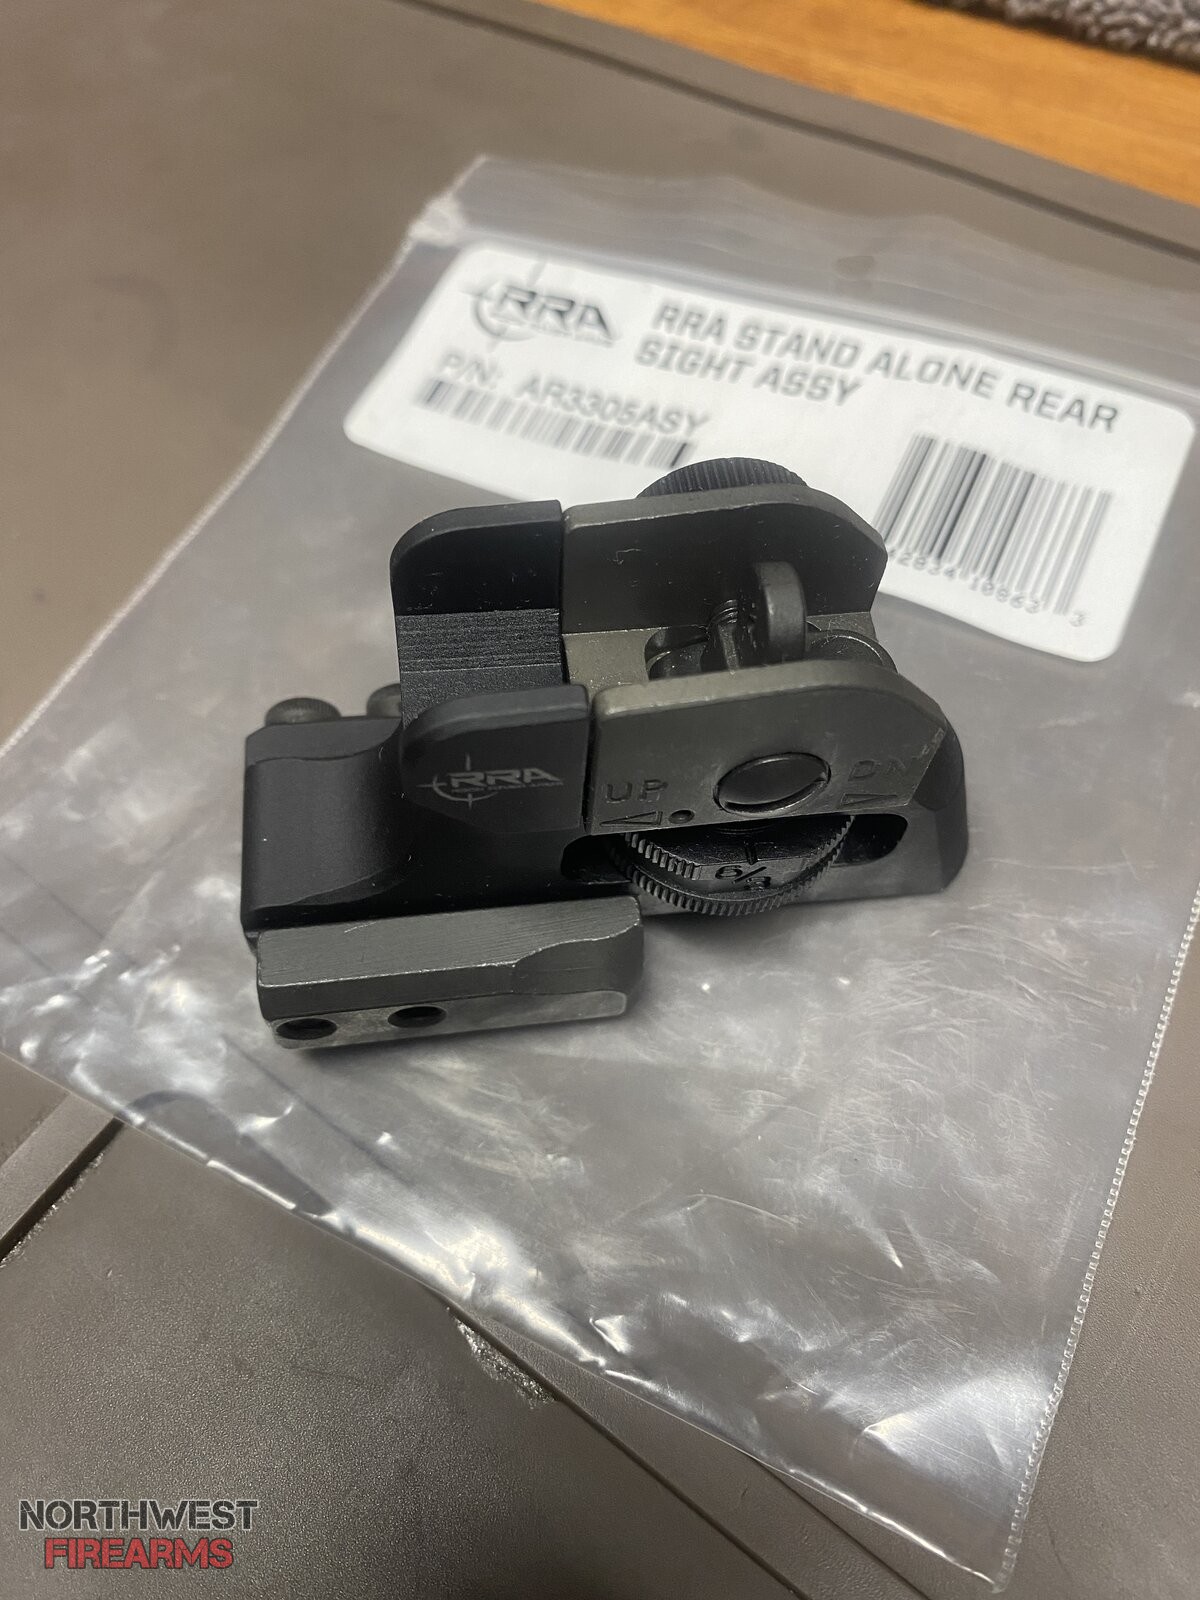 - SOLD - Brand New Rock River Arms Stand Alone Rear Sight Assembly ...